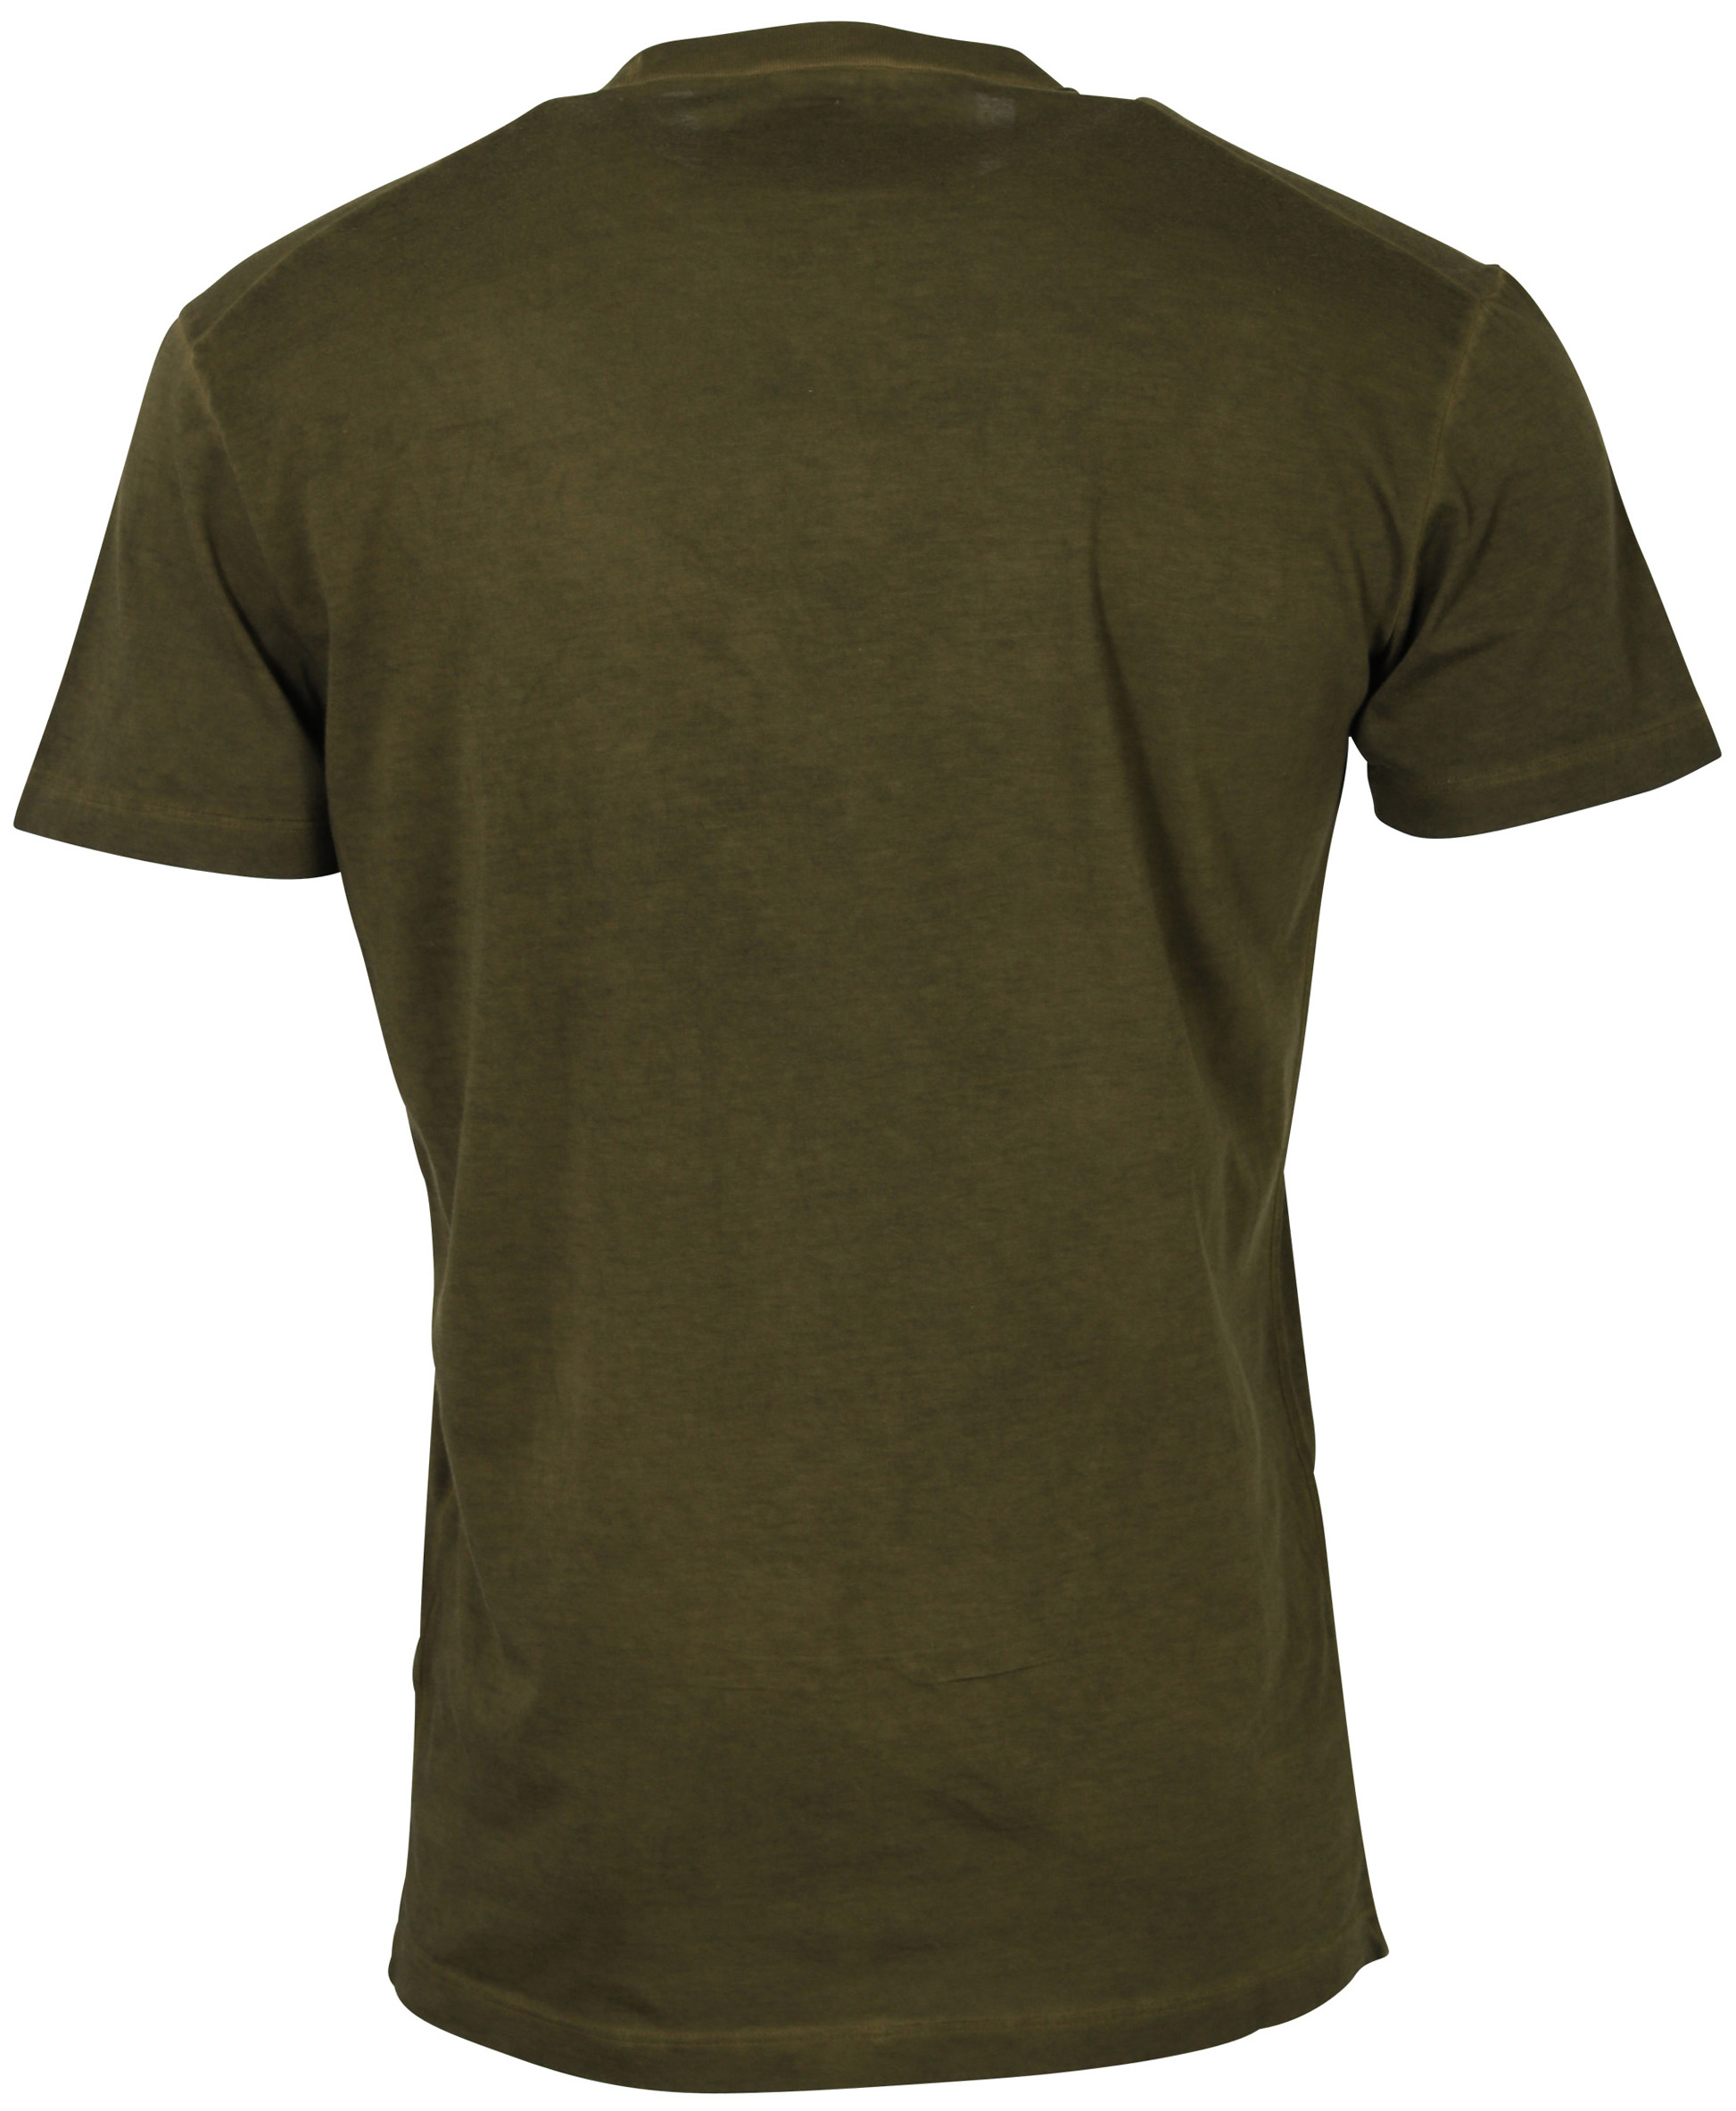 Dsquared T-Shirt Olive Printed S